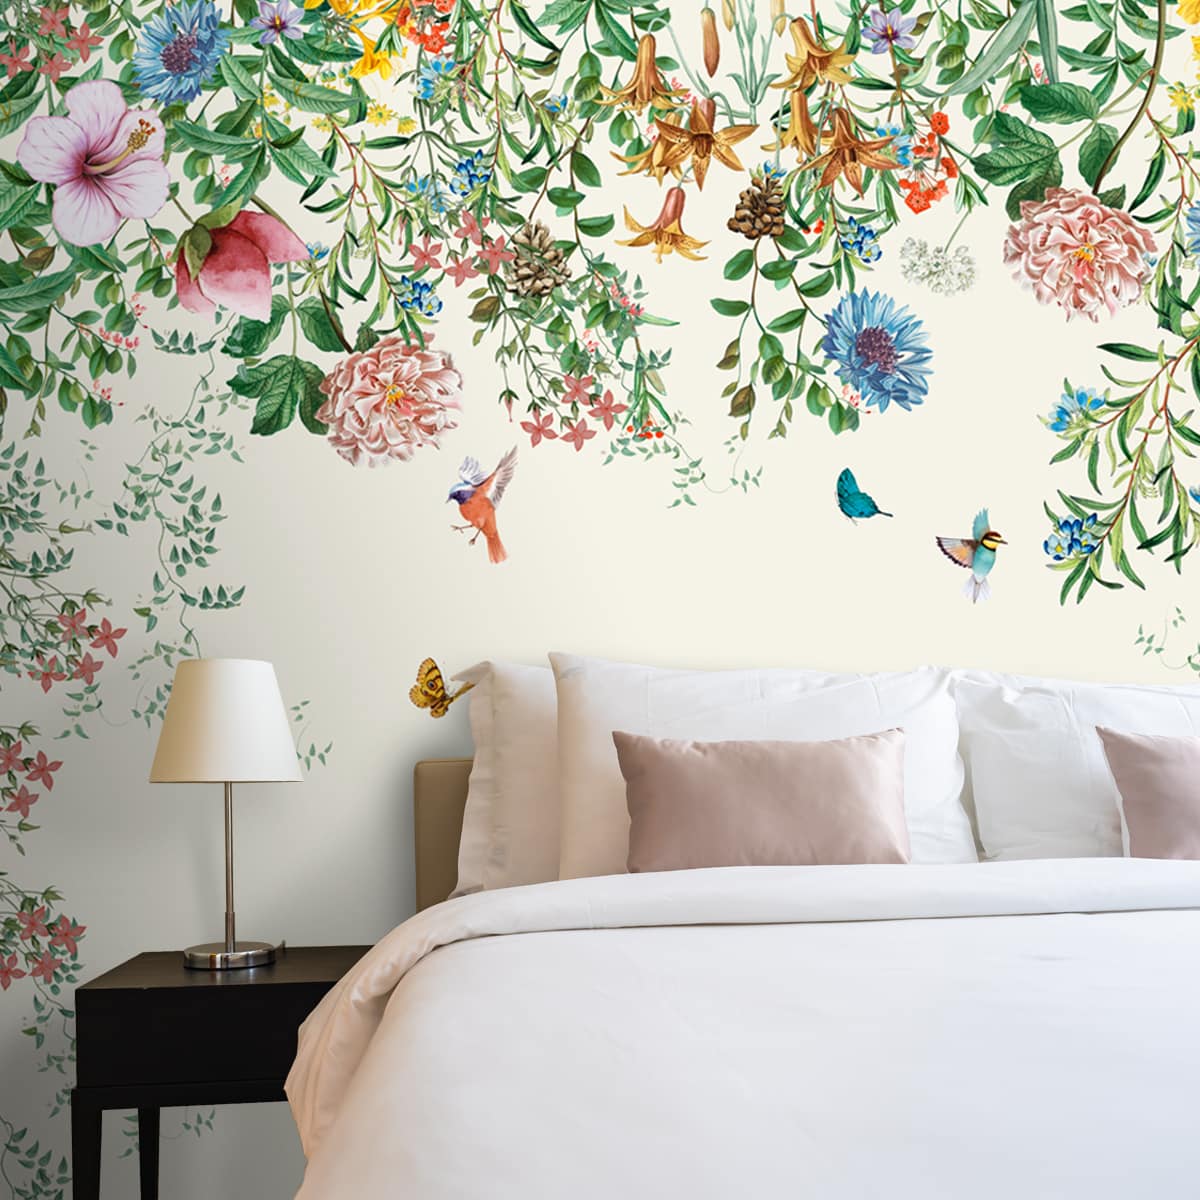 Unique Hanging Floral and Bird Wallpaper for Bedrooms | lifencolors ...